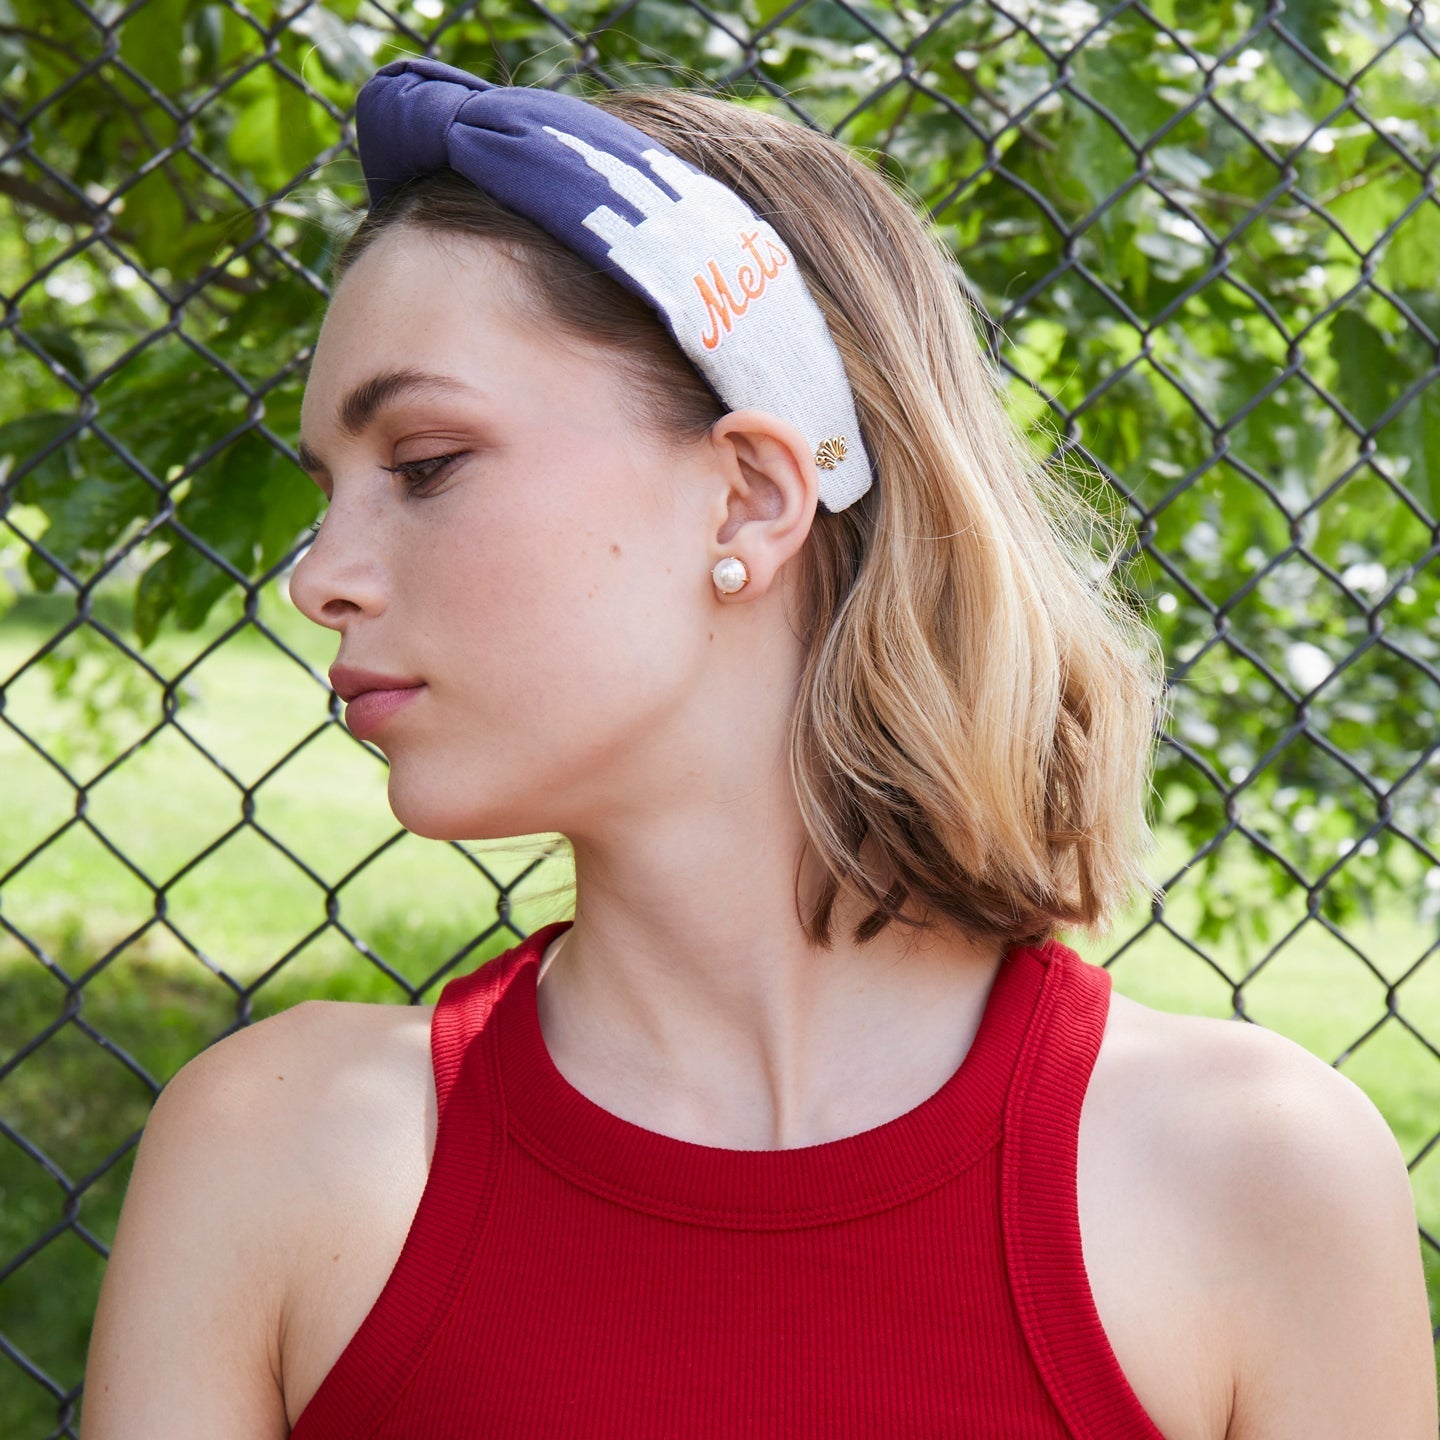 IVORY CHICAGO CUBS EMBROIDERED KNOTTED HEADBAND - Lele Sadoughi